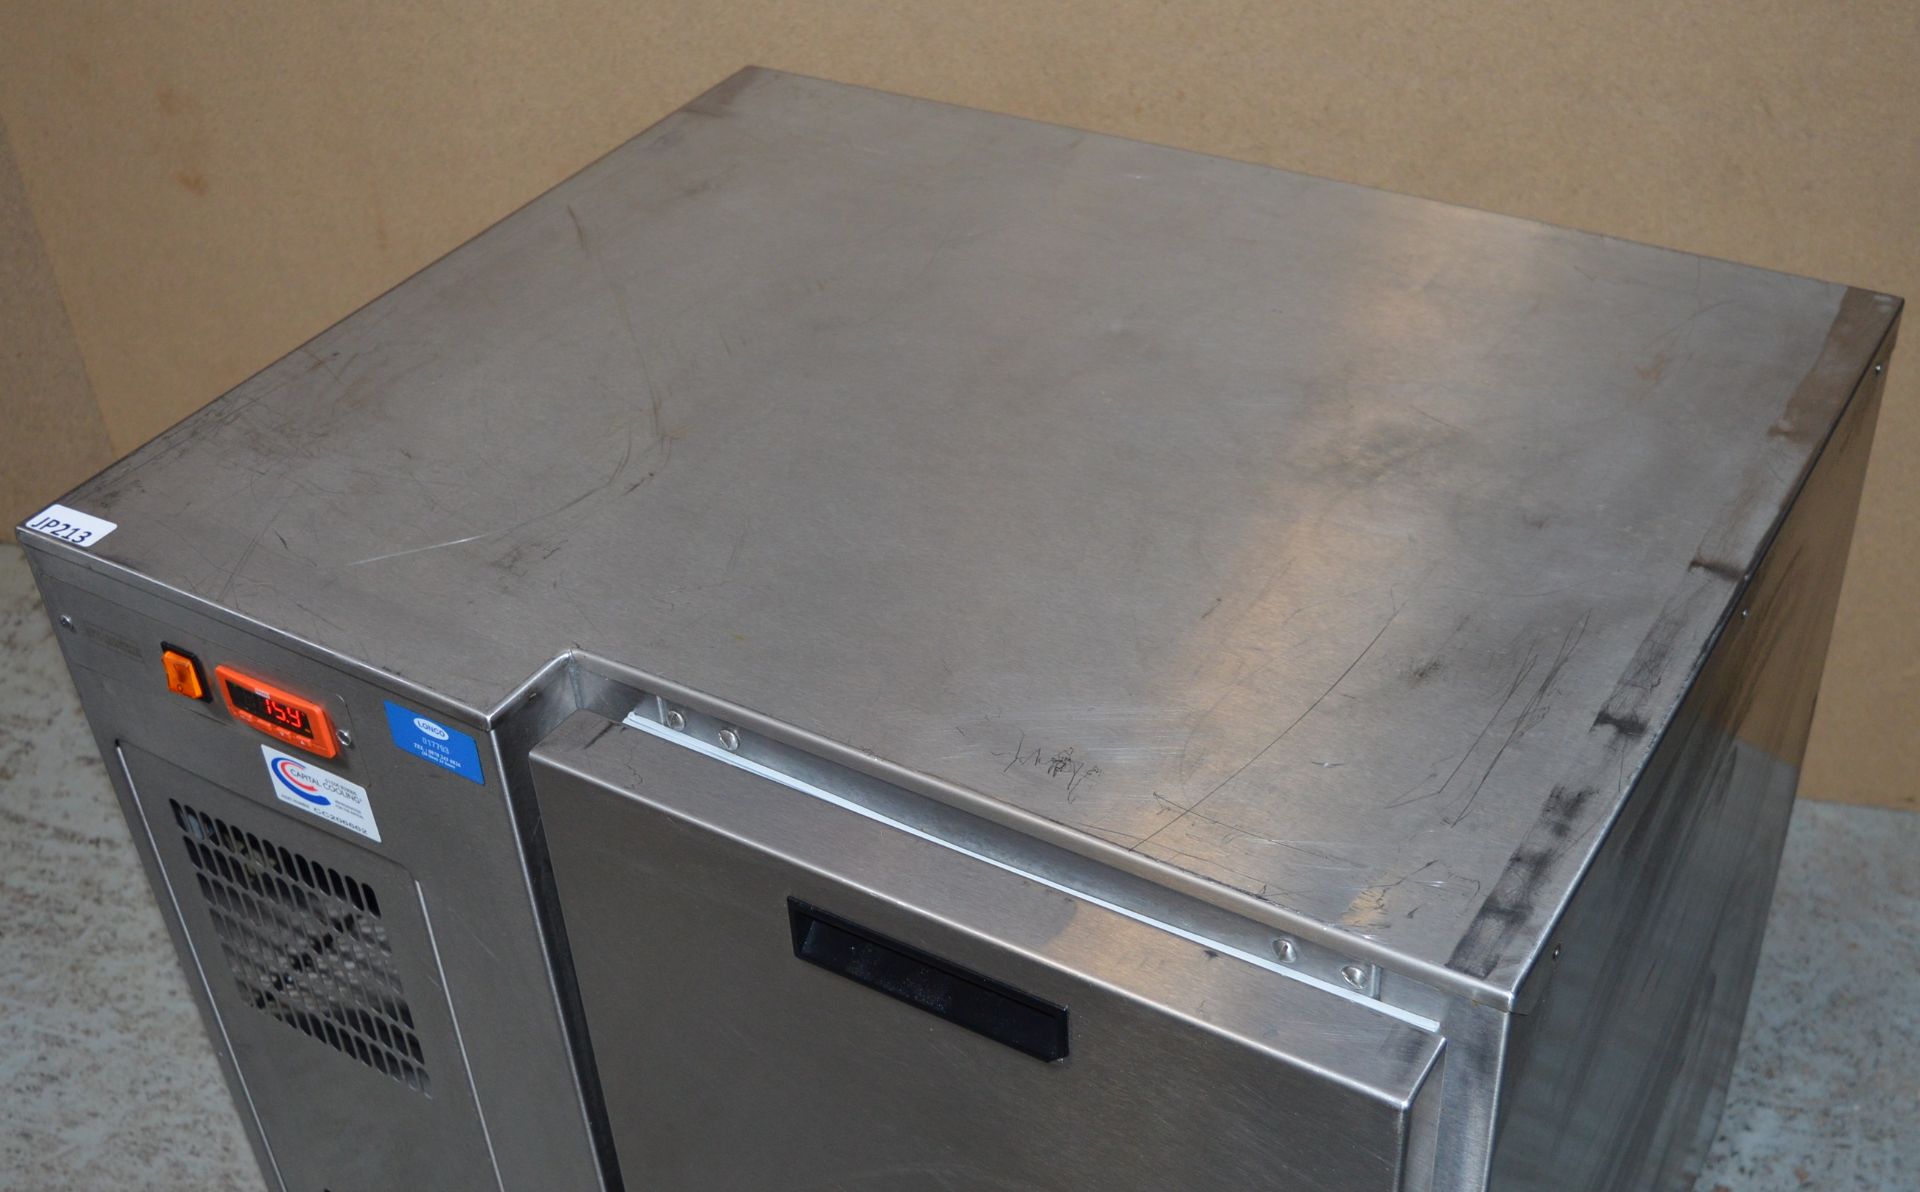 1 x Franke Stainless Steel Two Drawer Under Counter Refrigerator - CL232 - Type FKE-80-S2 - Ref - Image 3 of 6